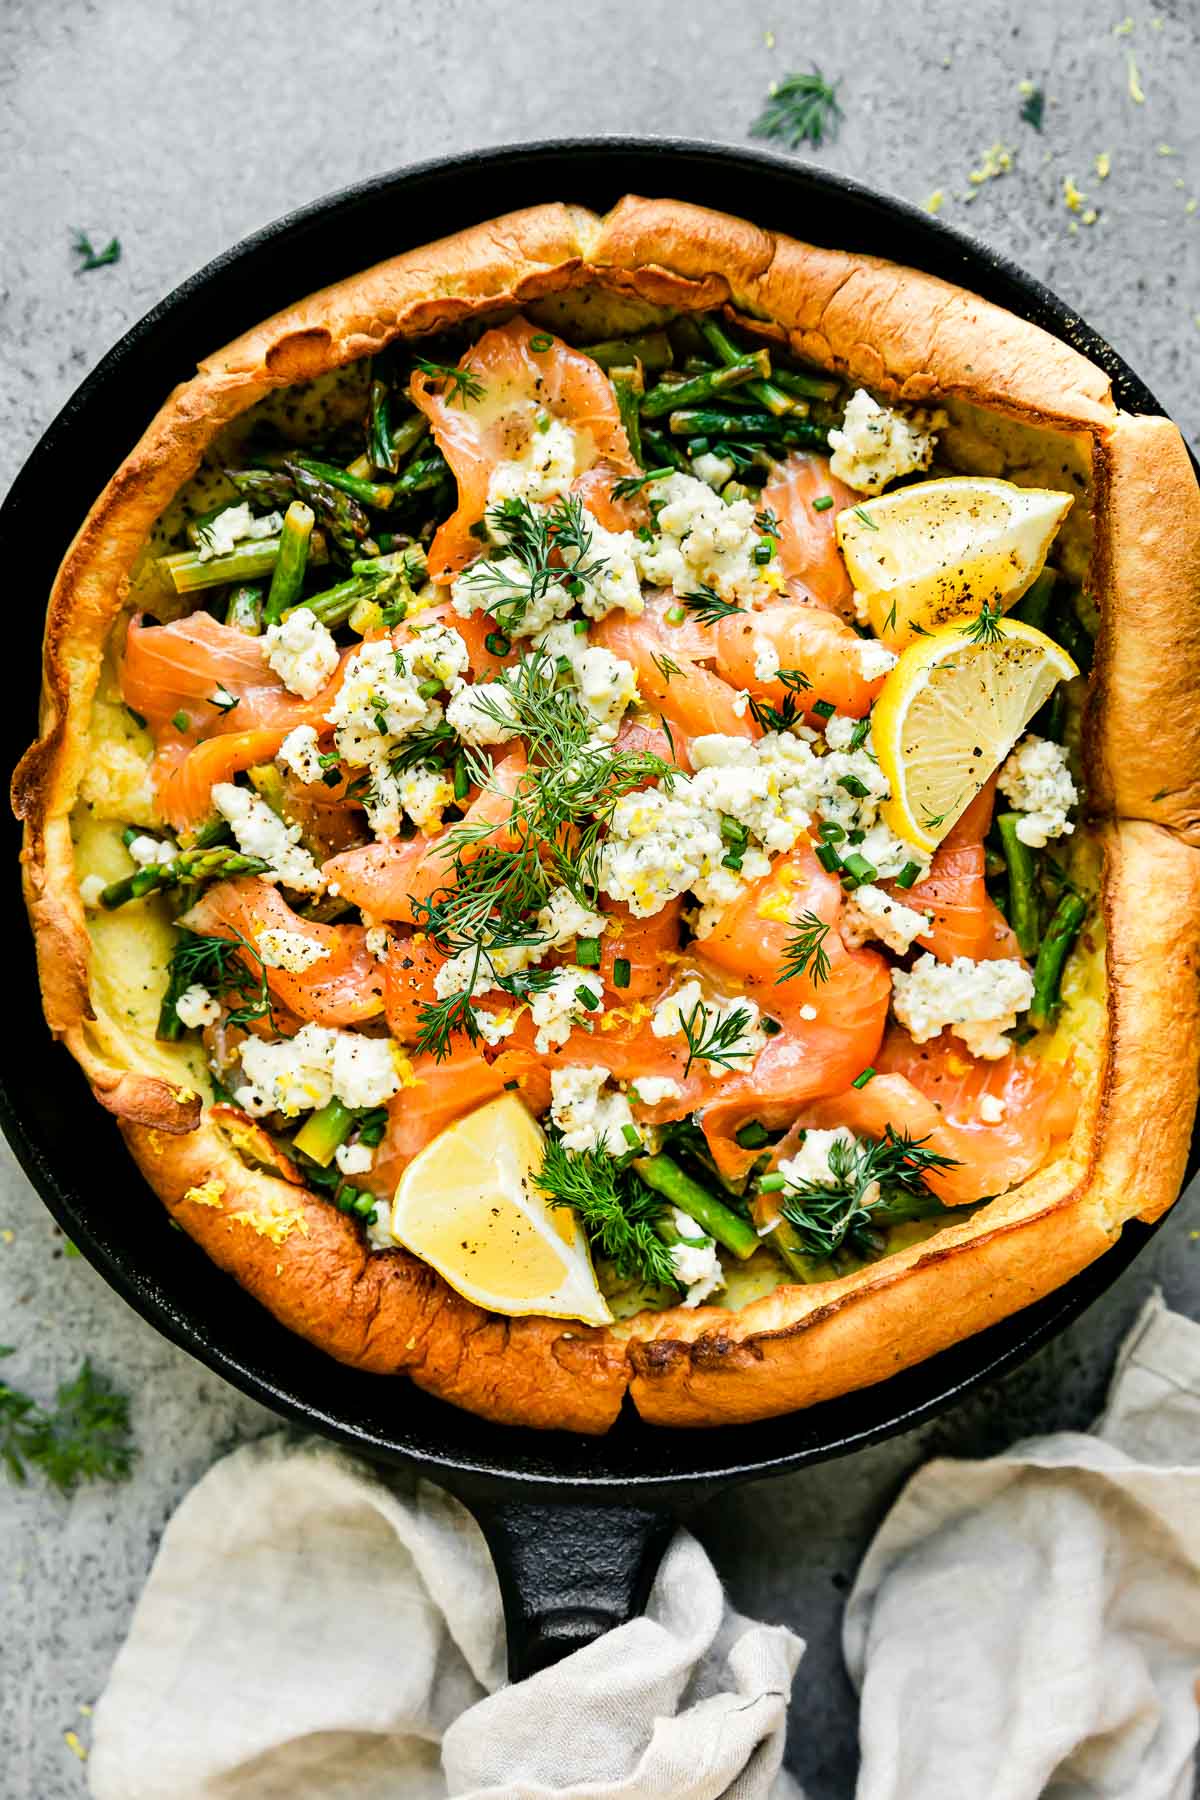 An assembled Dutch baby topped with smoked salmon, asparagus, and a Boursin cheese fills a large black cast iron skillet. The Dutch baby is garnished with lemon wedges, a lemon butter sauce, and fresh herbs. The skillet sits atop a light gray textured surface with a light cream linen napkin tied around the skillet handle.